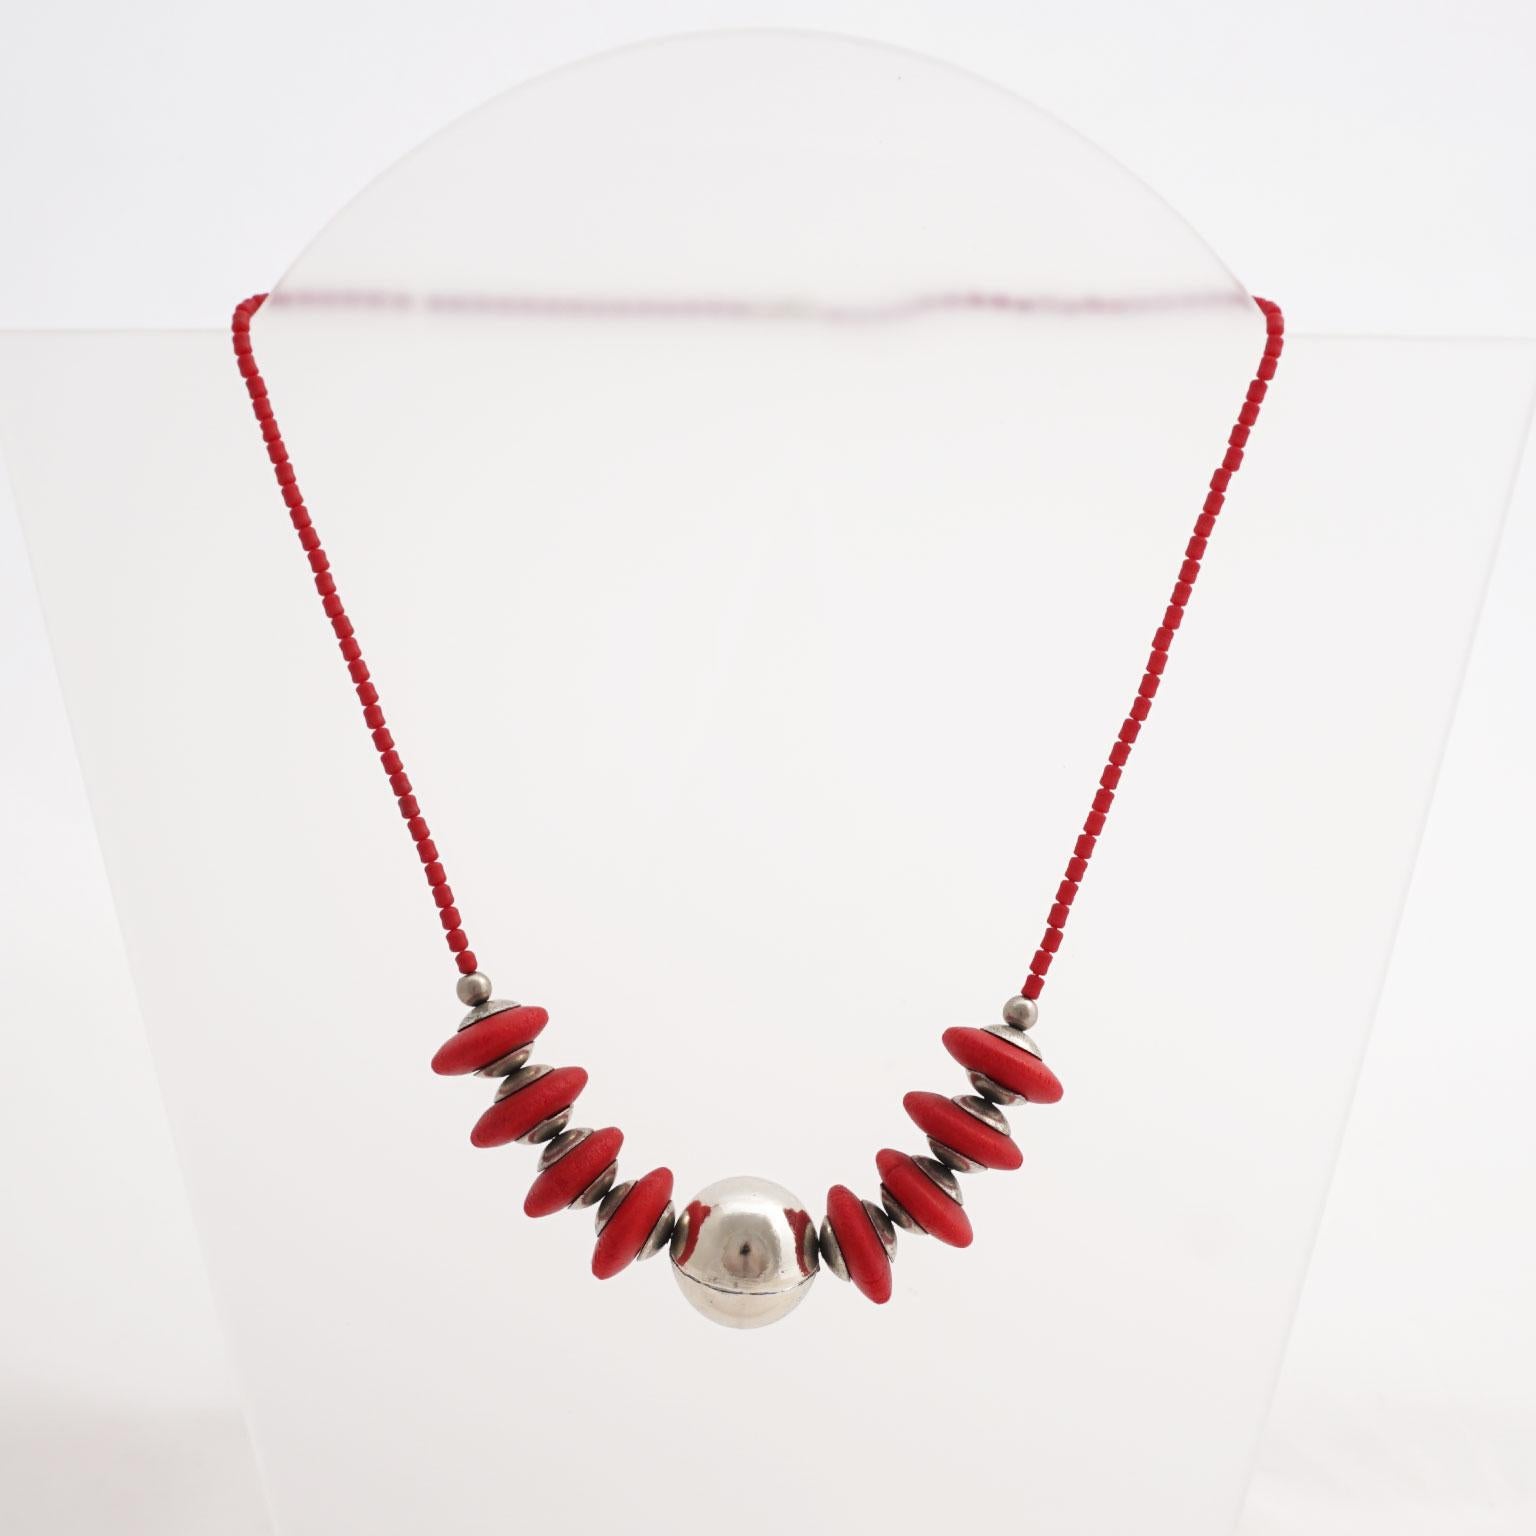 Bauhaus Collier in Chrome and Galalith by Jakob Bengel, around 1920/30 For Sale 4